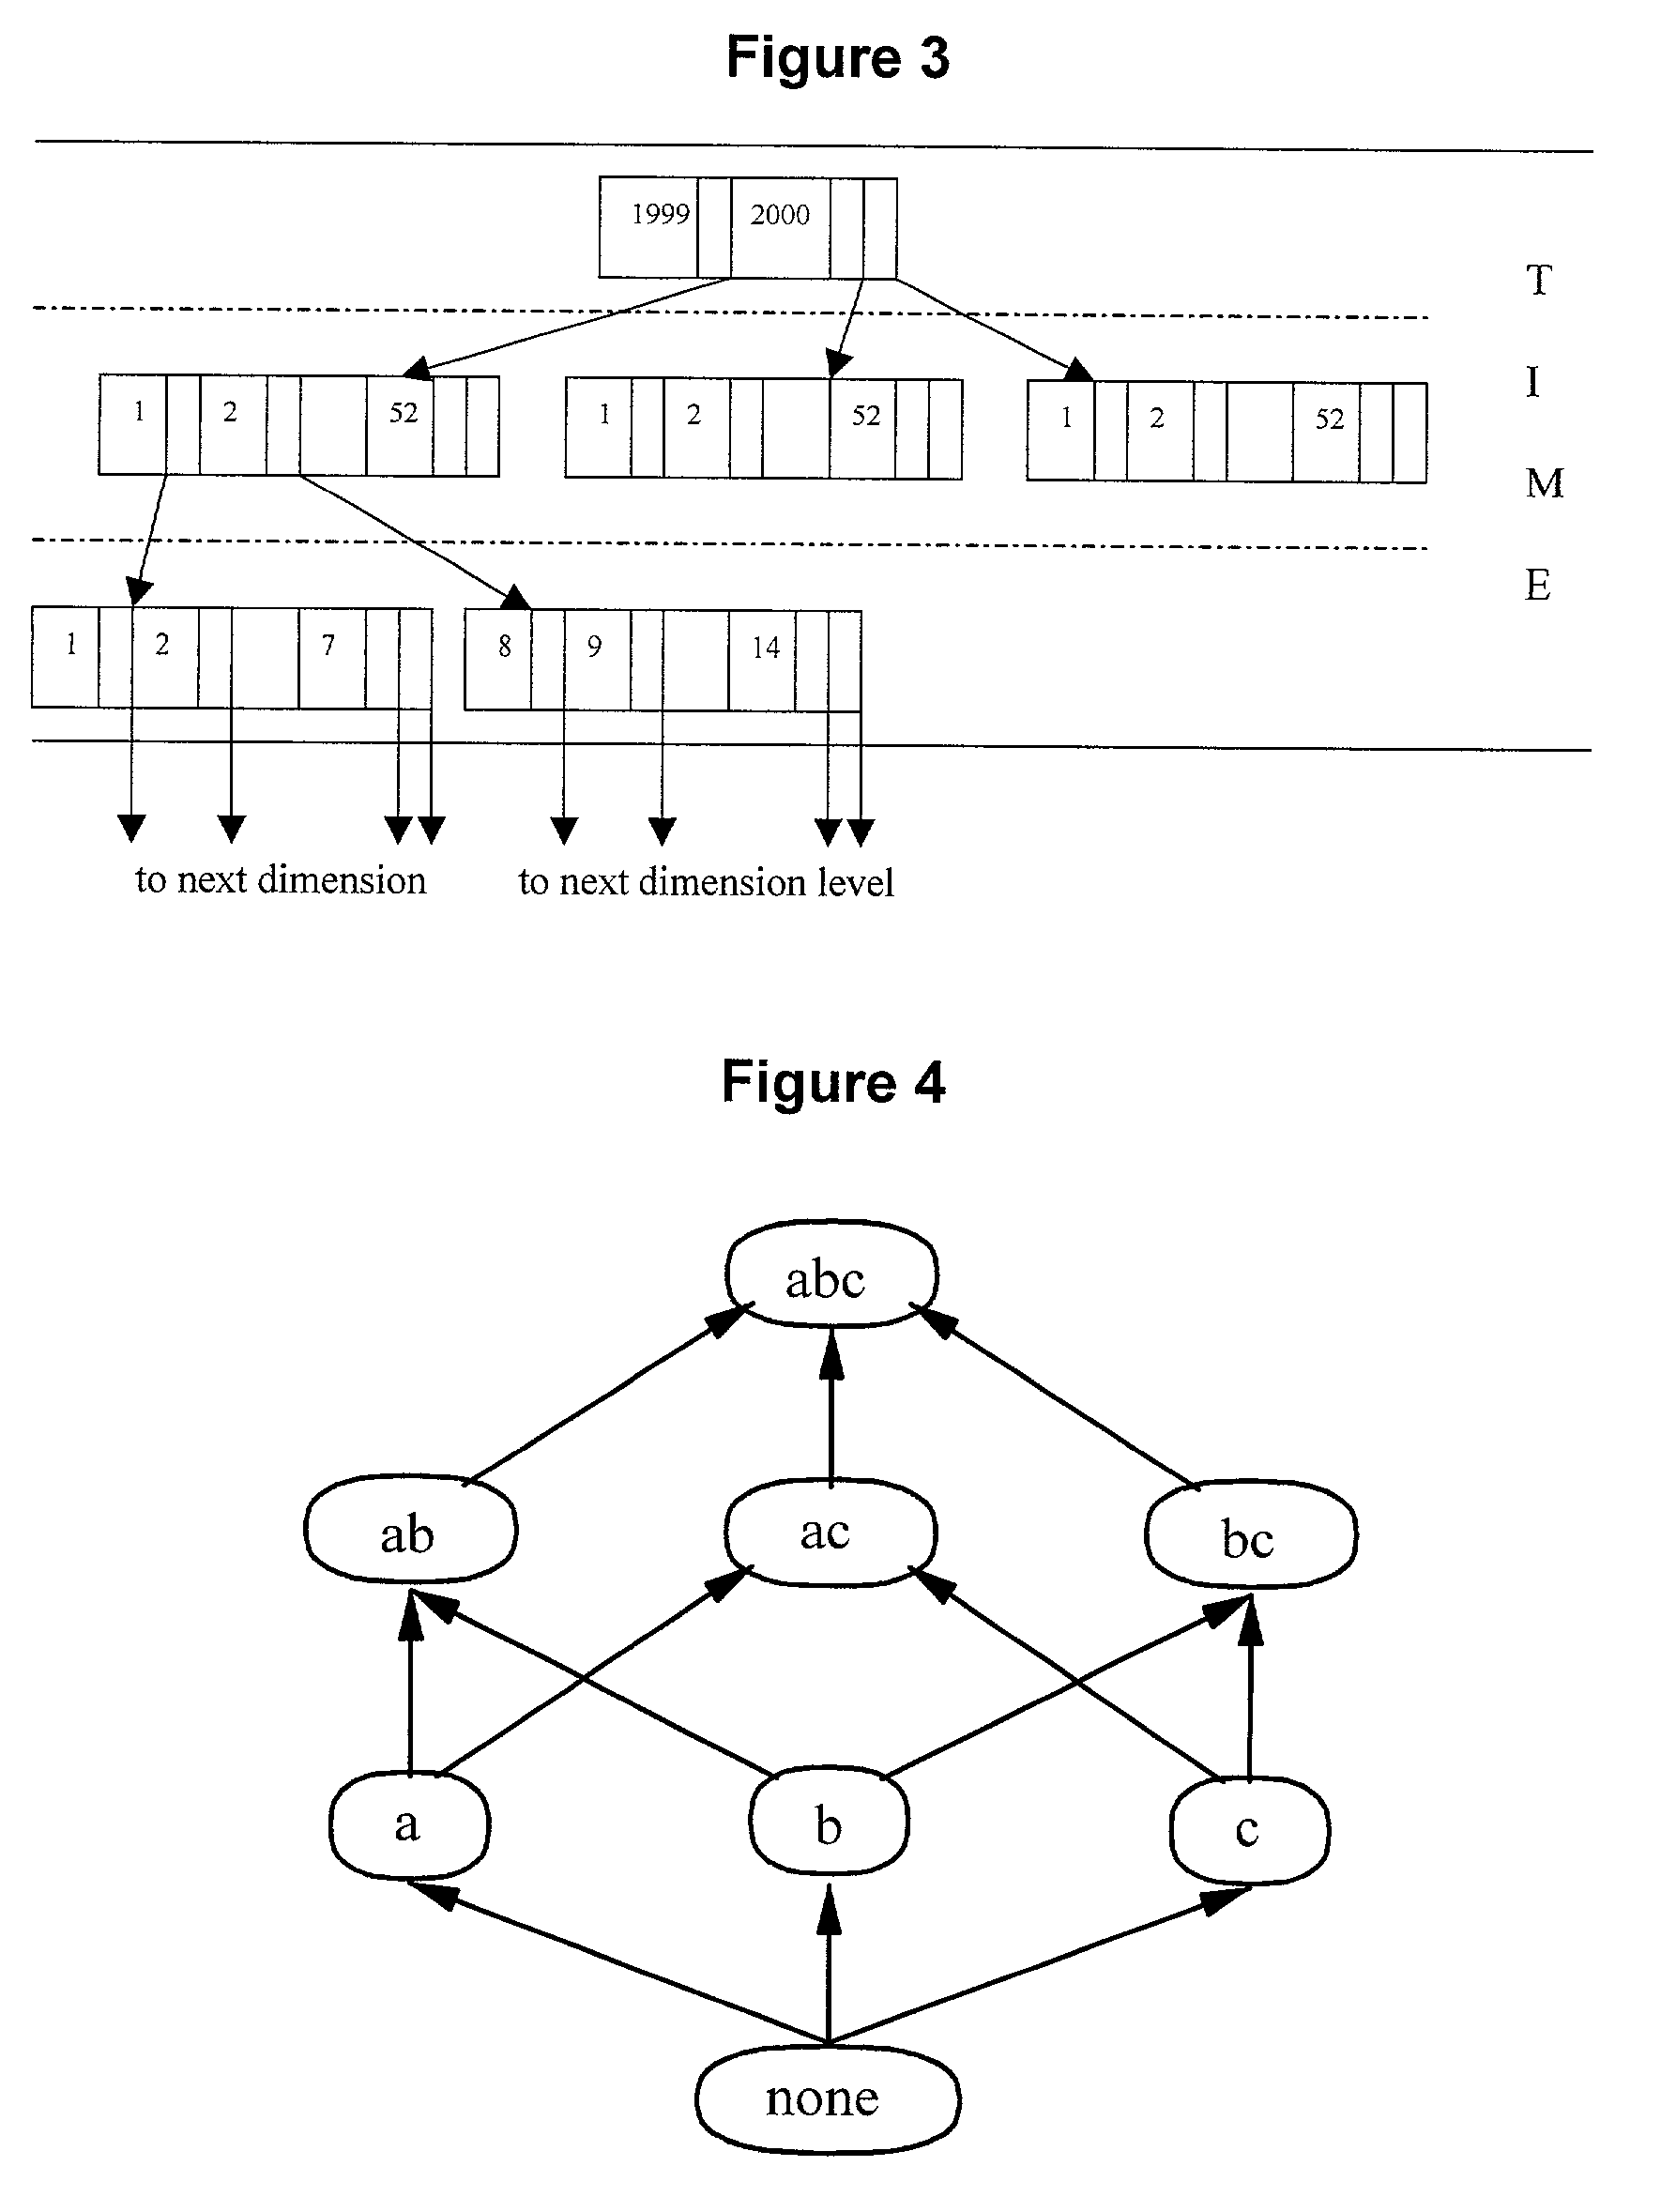 Dwarf cube architecture for reducing storage sizes of multidimensional data